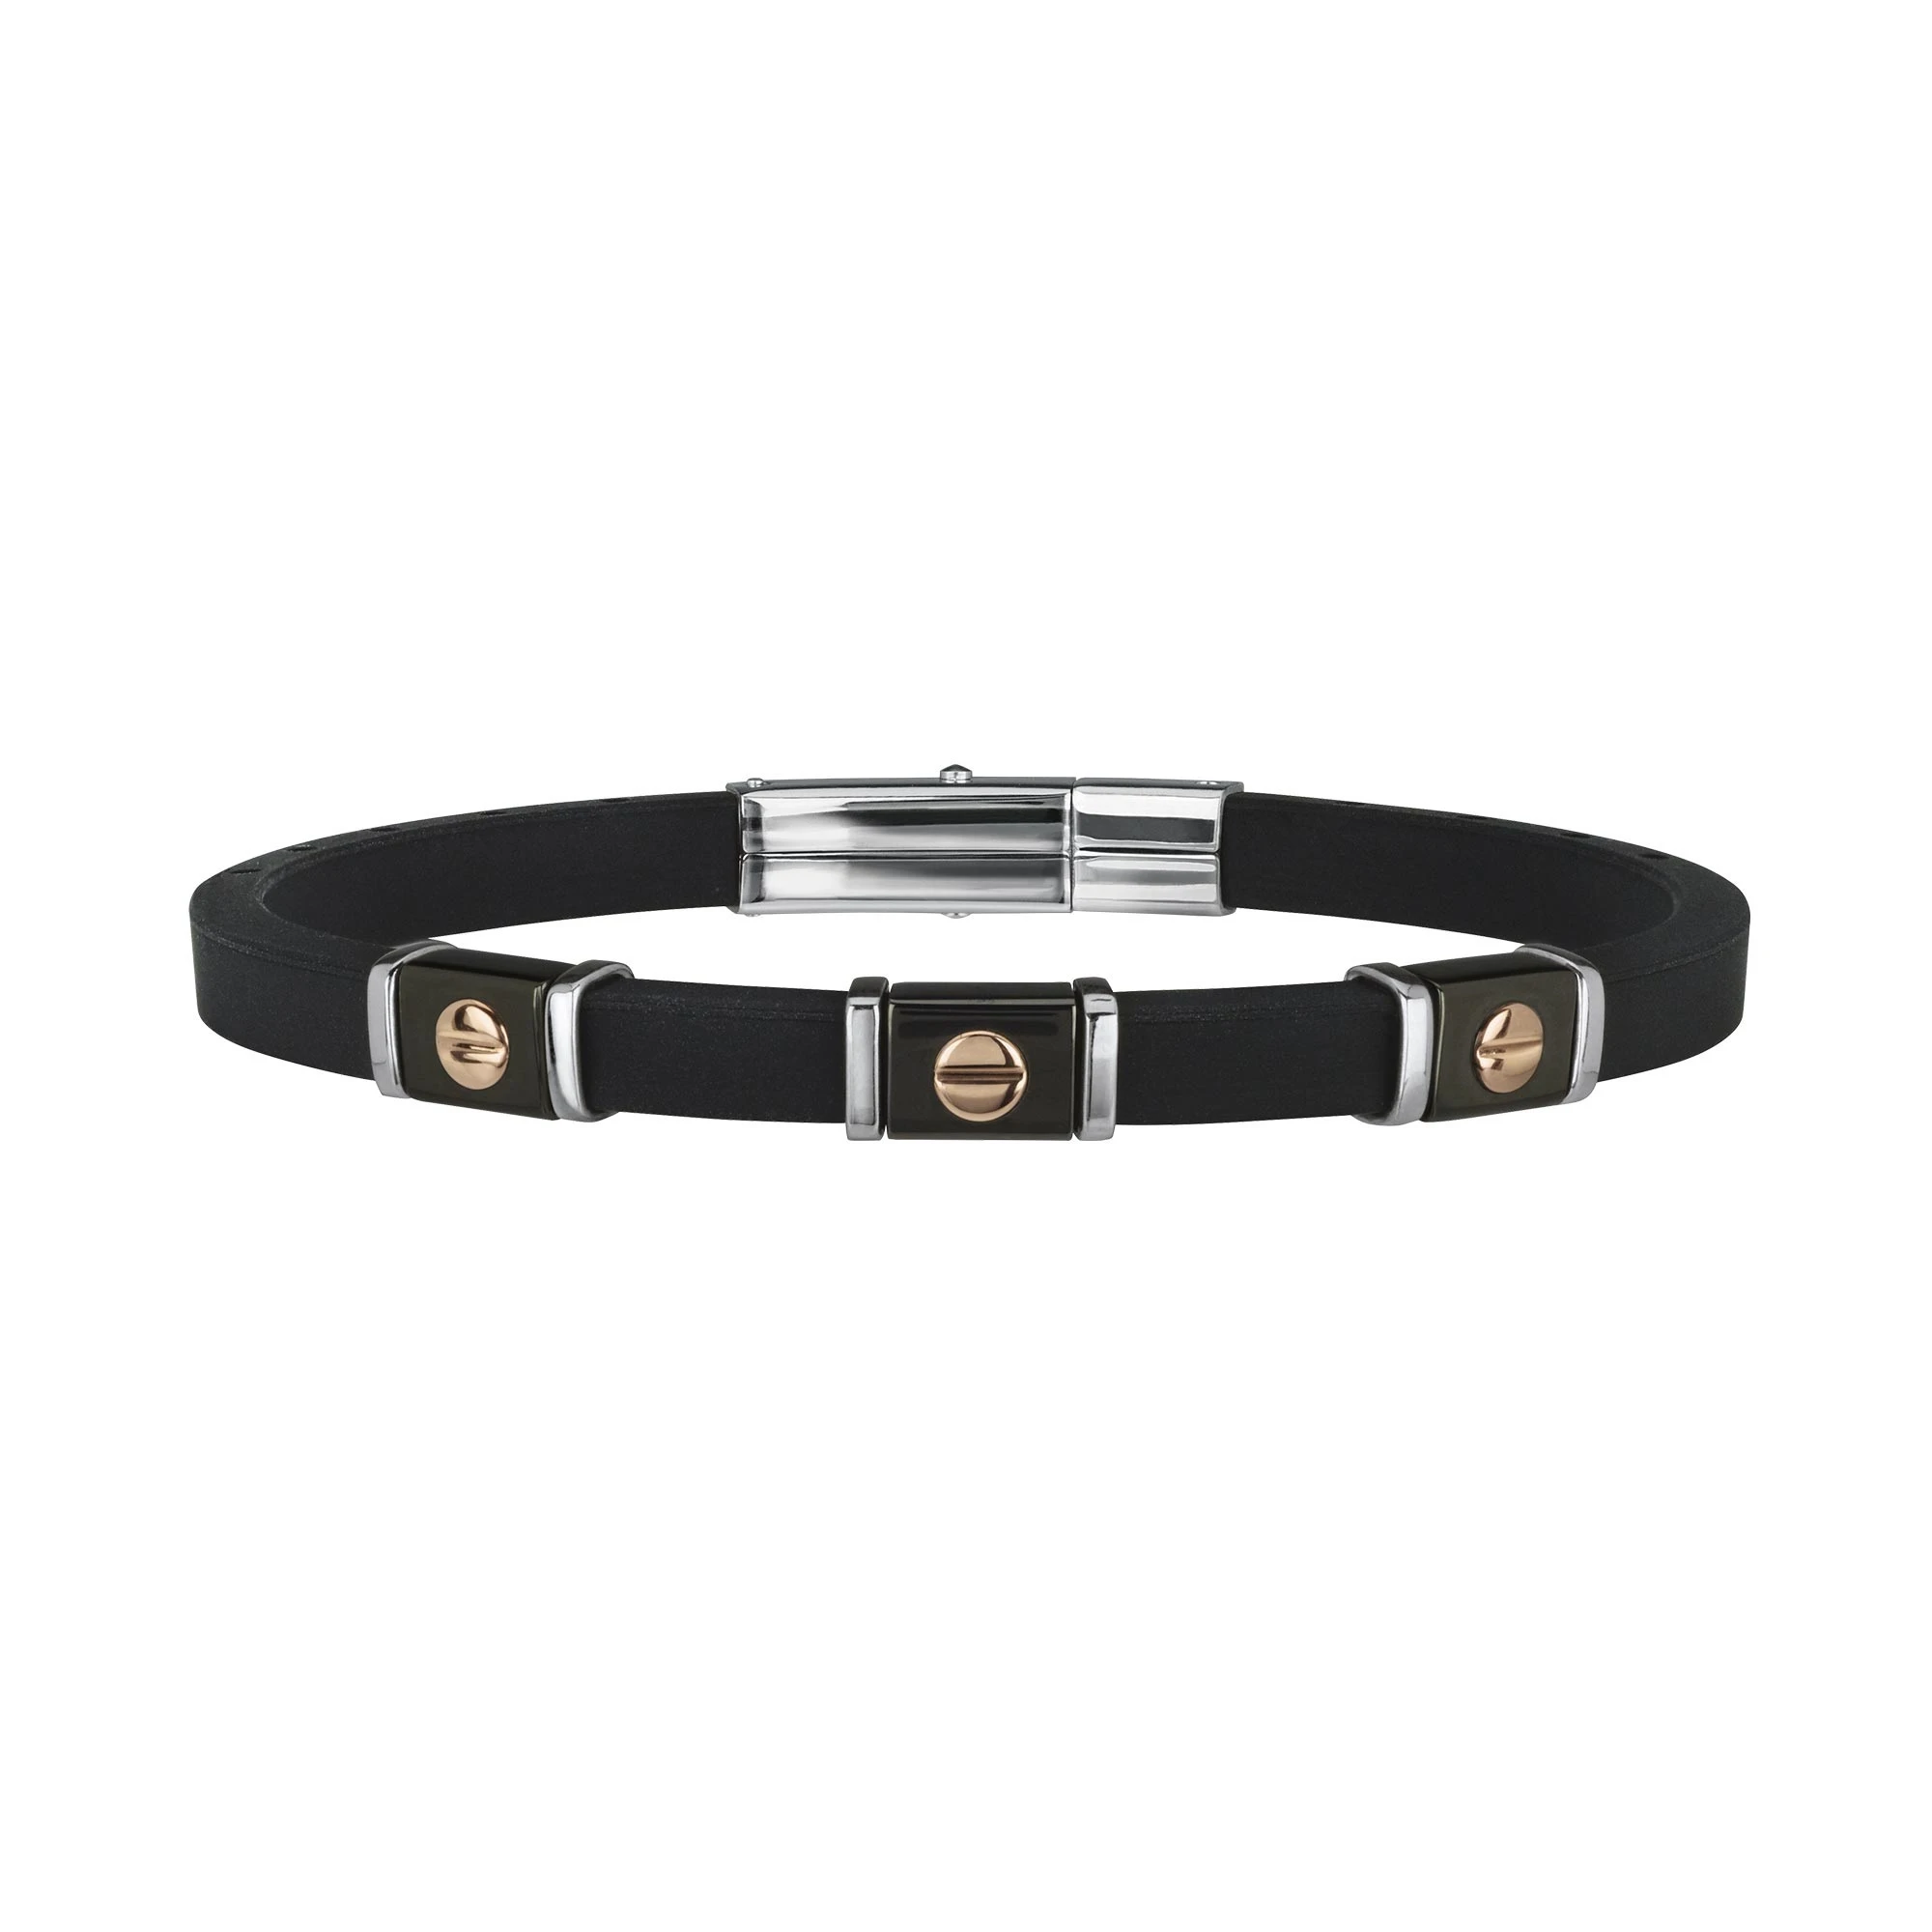 9K - SILICON BRACELET WITH STAINLESS STEEL INSERTS AND 9K ROSE GOLD DETAIL - 1 - TJ1944 | Breil